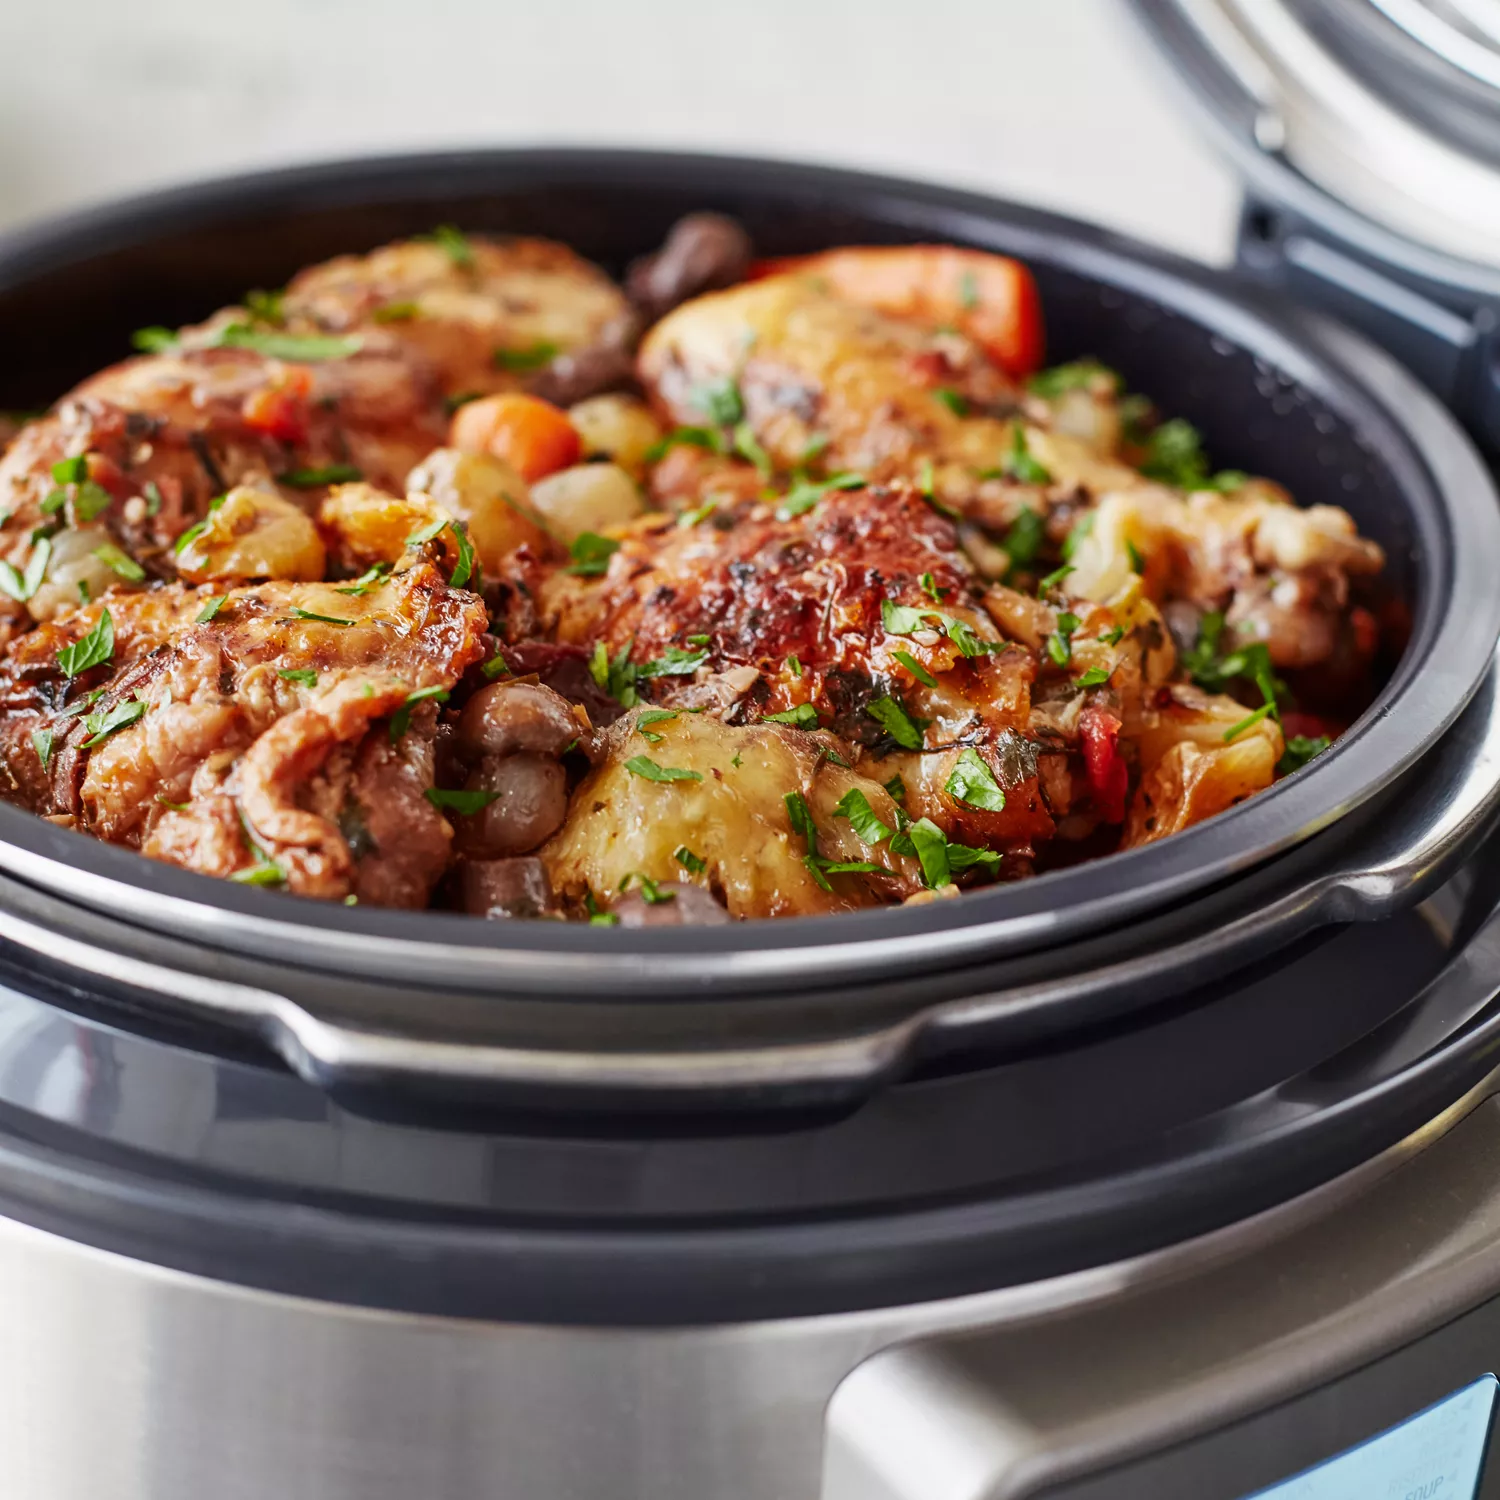 Review: Great meals made fast or slow with the Breville Fast Slow Cooker